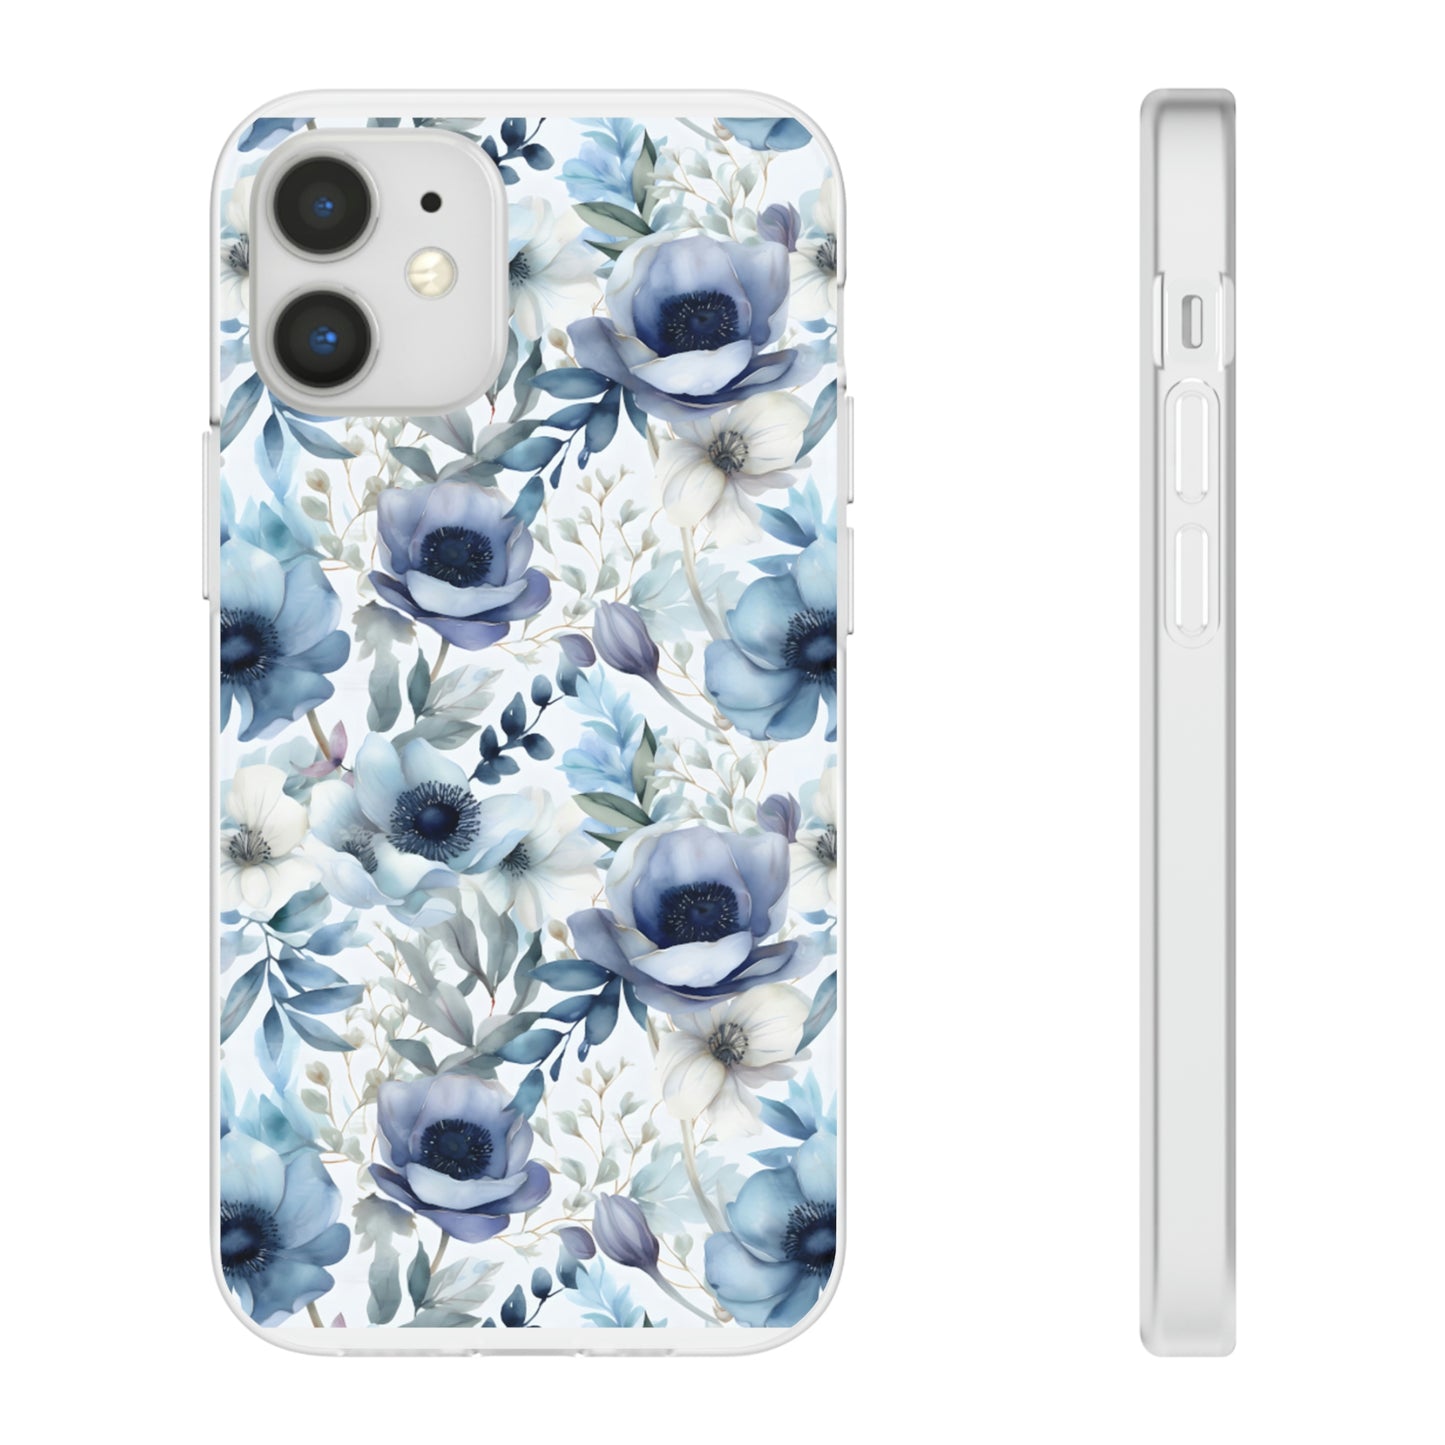 Floral Flexi Cases - for many iPhone variants